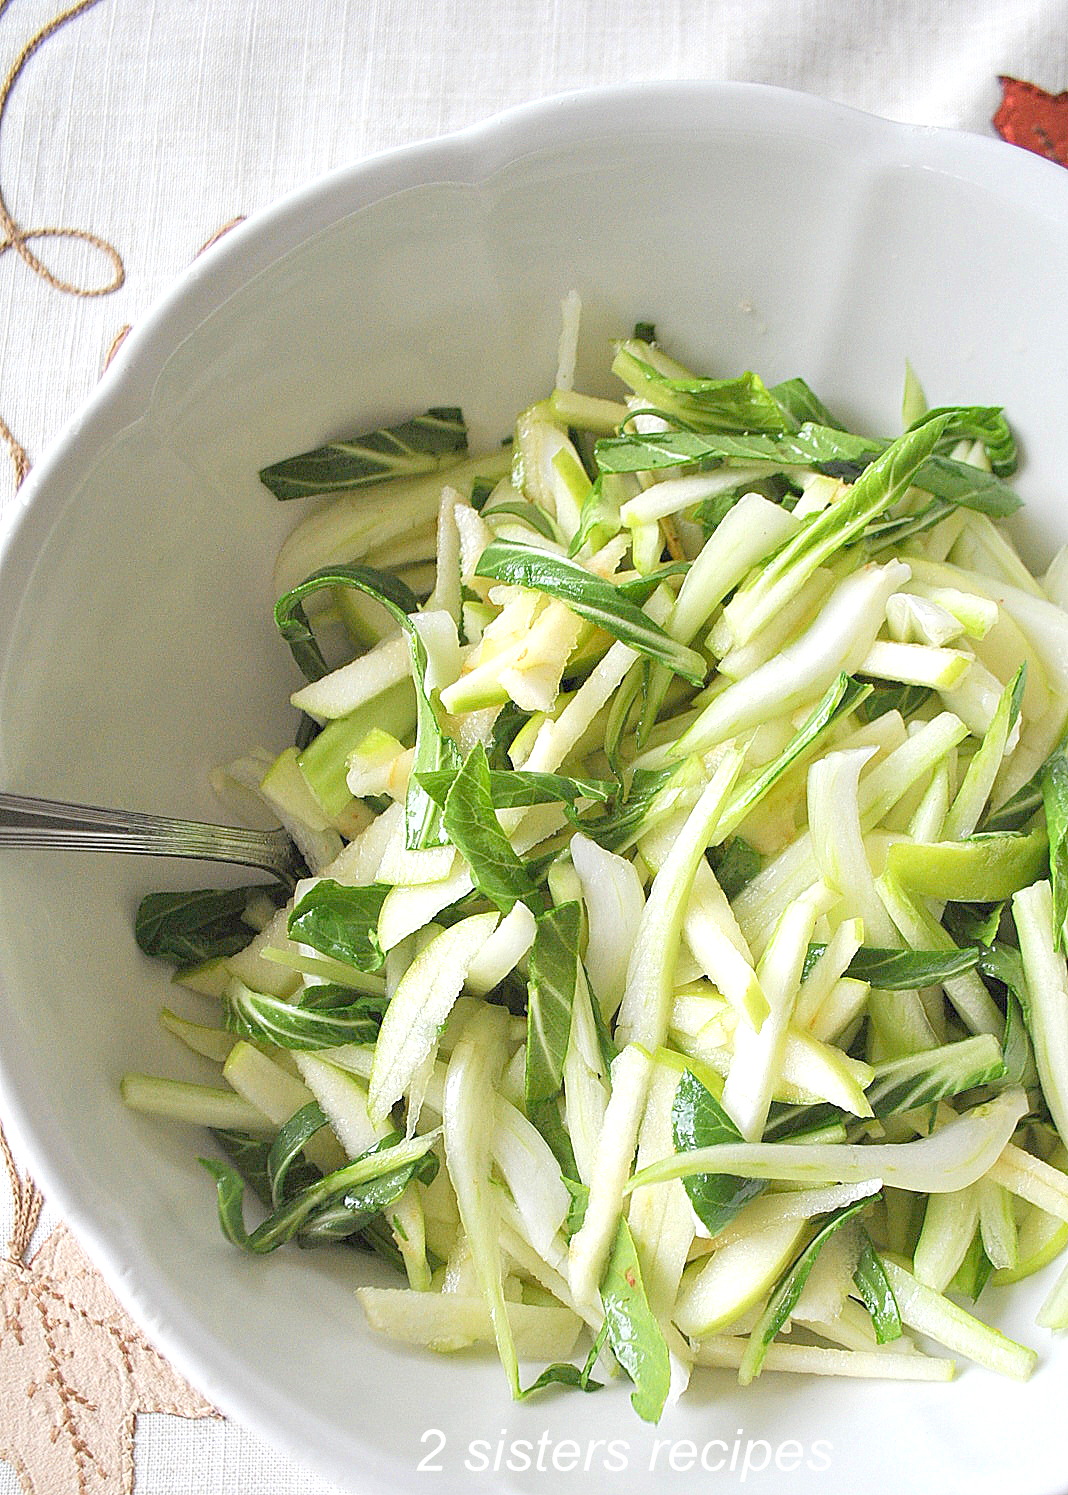 Sliced apples and bok choy are tossed in a white salad bowl.